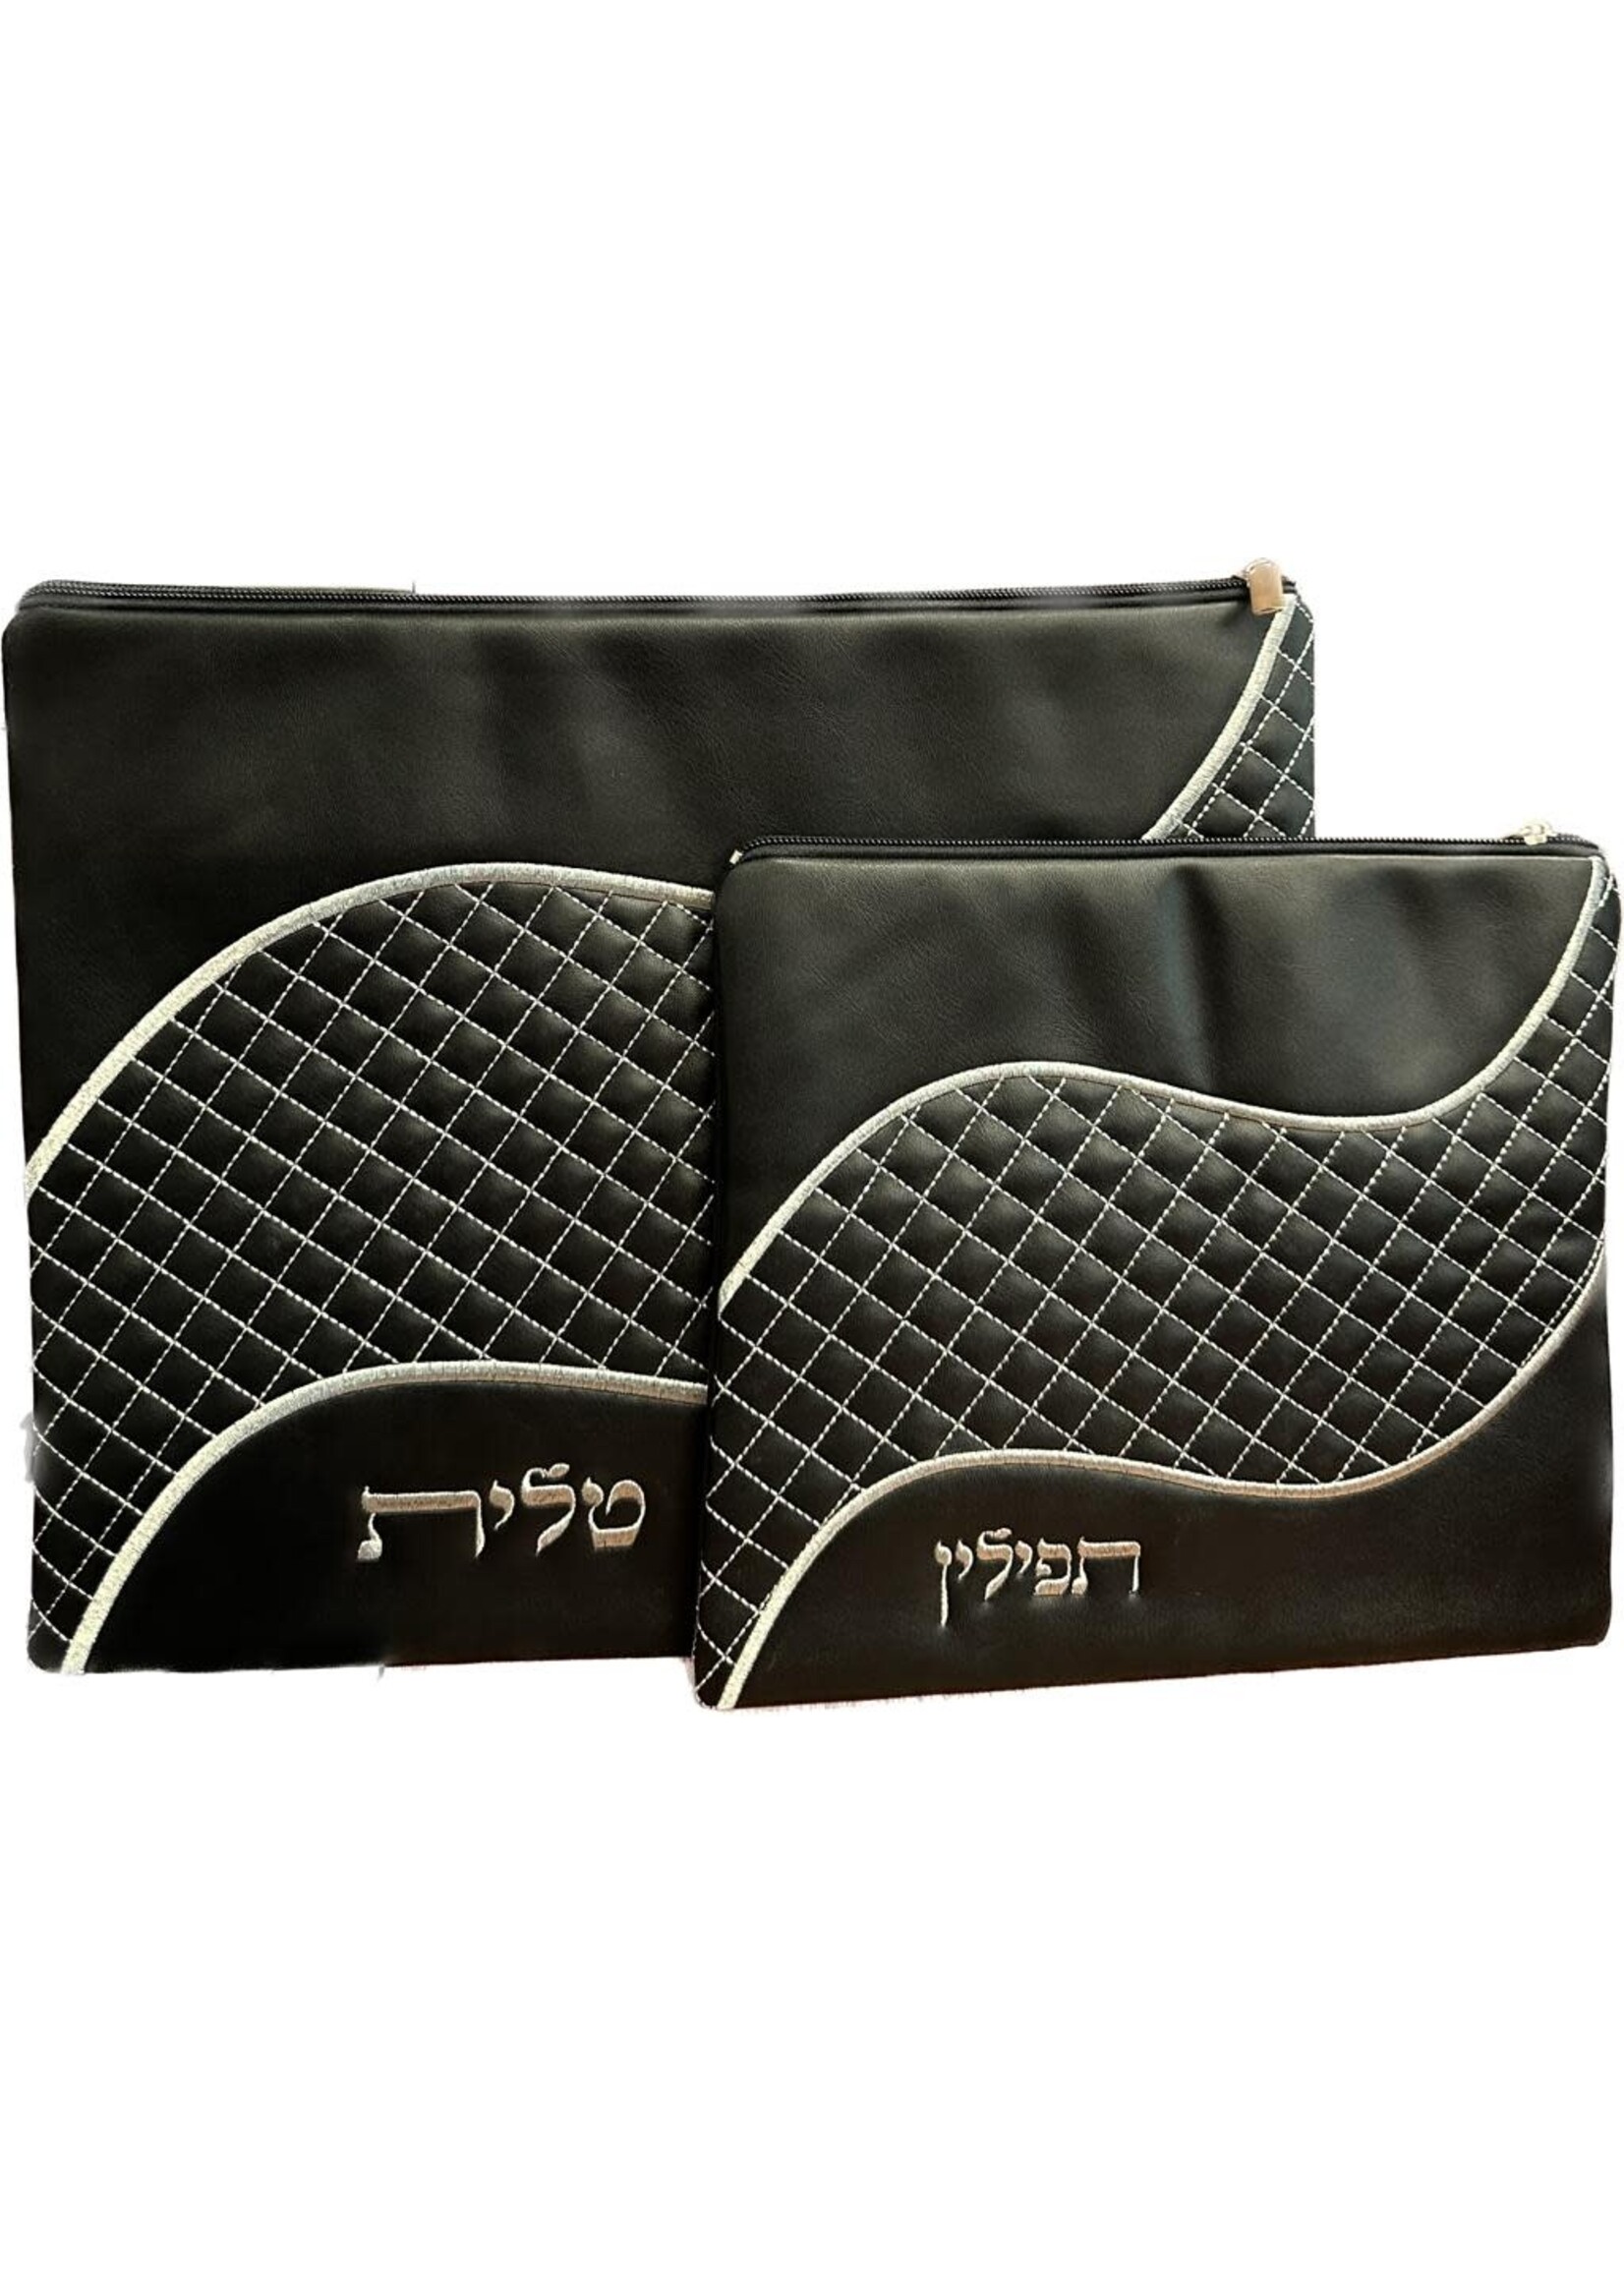 TALLIT BAG SET BLACK FAUX LEATHER WITH SILVER KOTEL EMBRIODERY